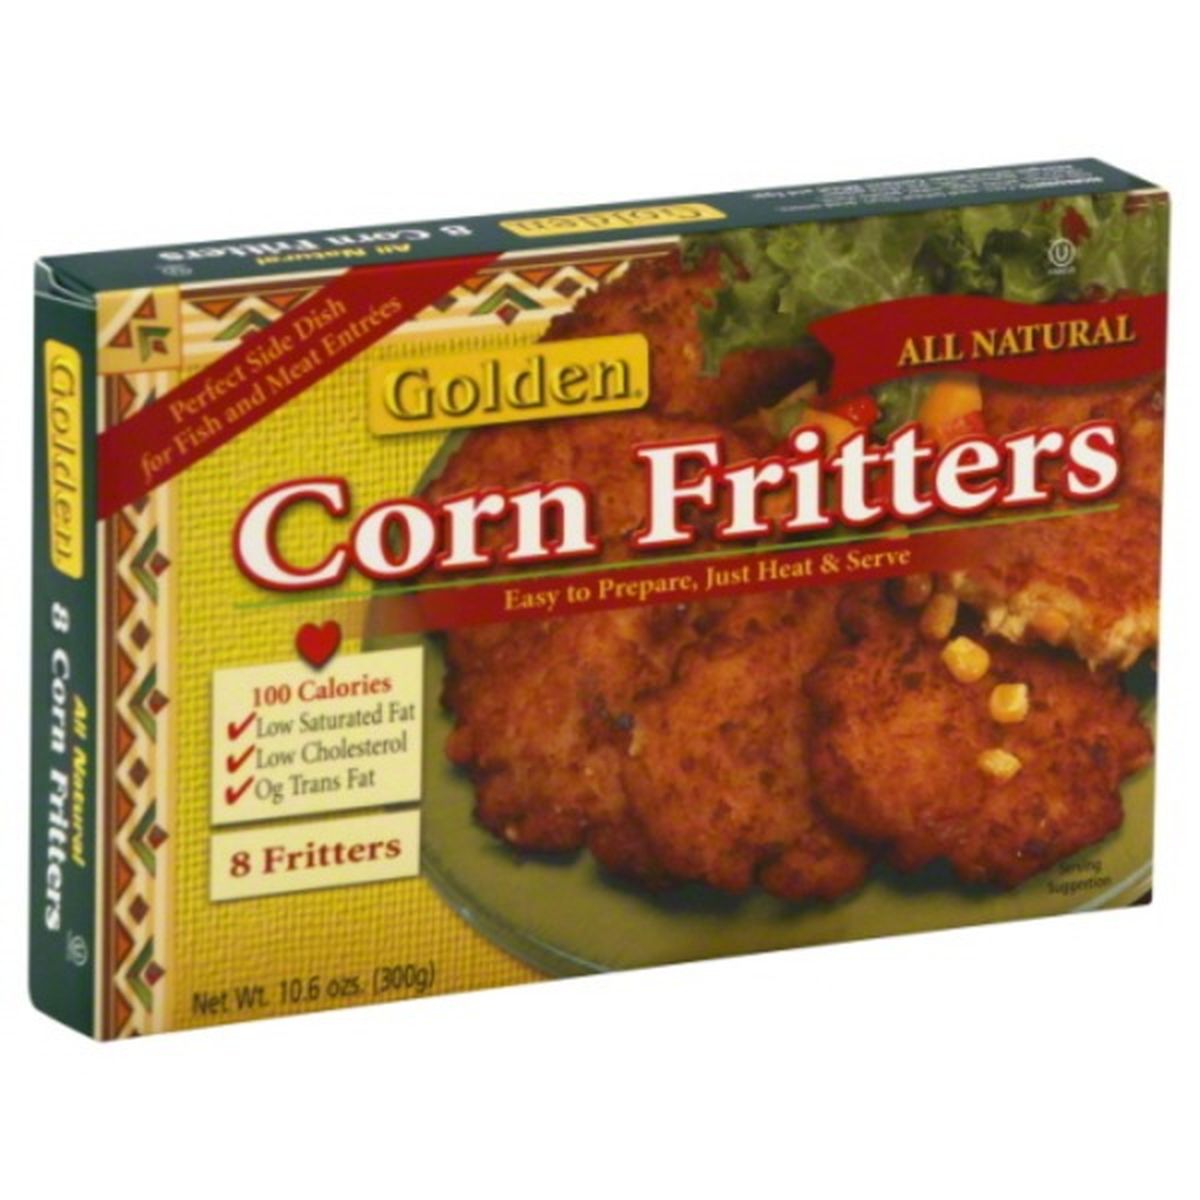 Calories in Golden Star Corn Fritters